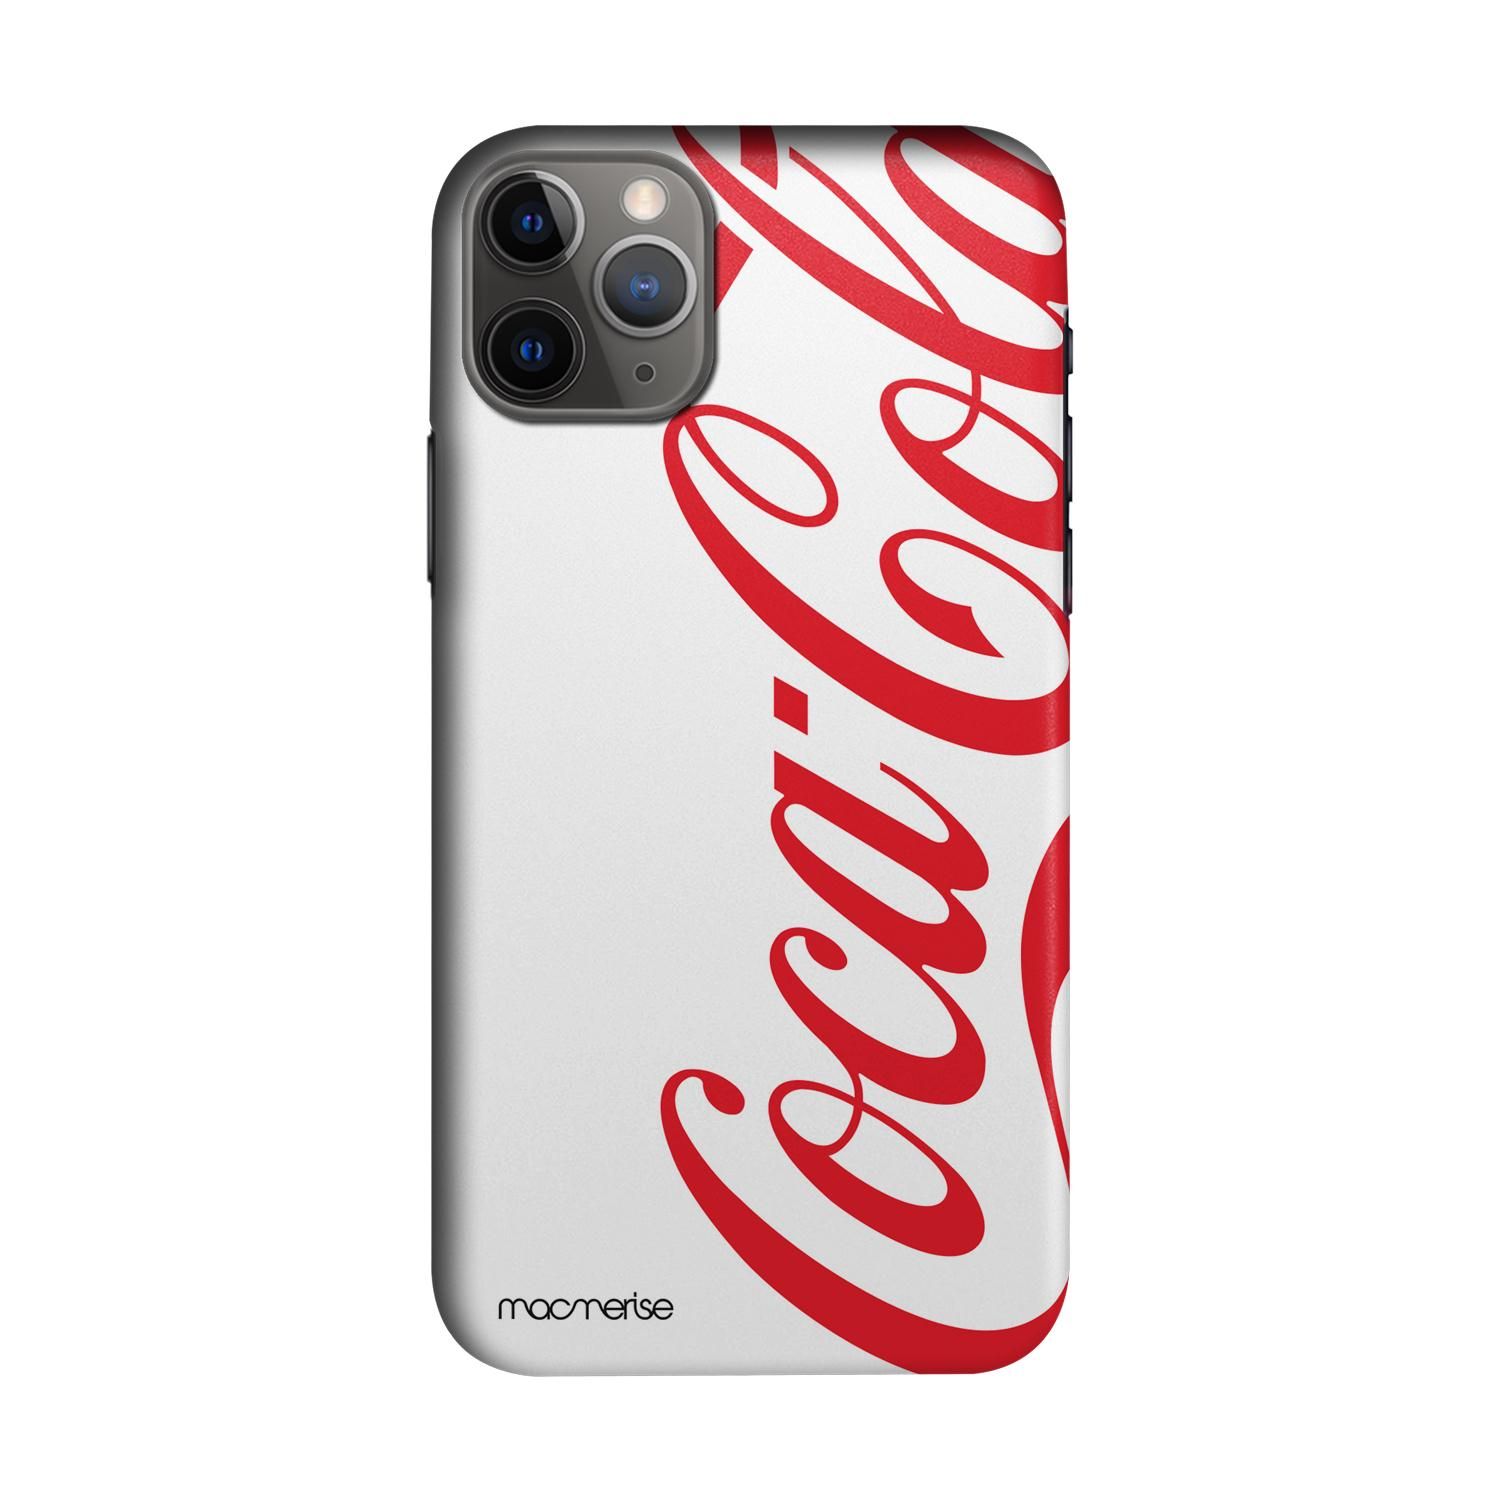 Buy Coke White Red Macmerise Sleek Case Cover For Iphone 11 Pro Max Online